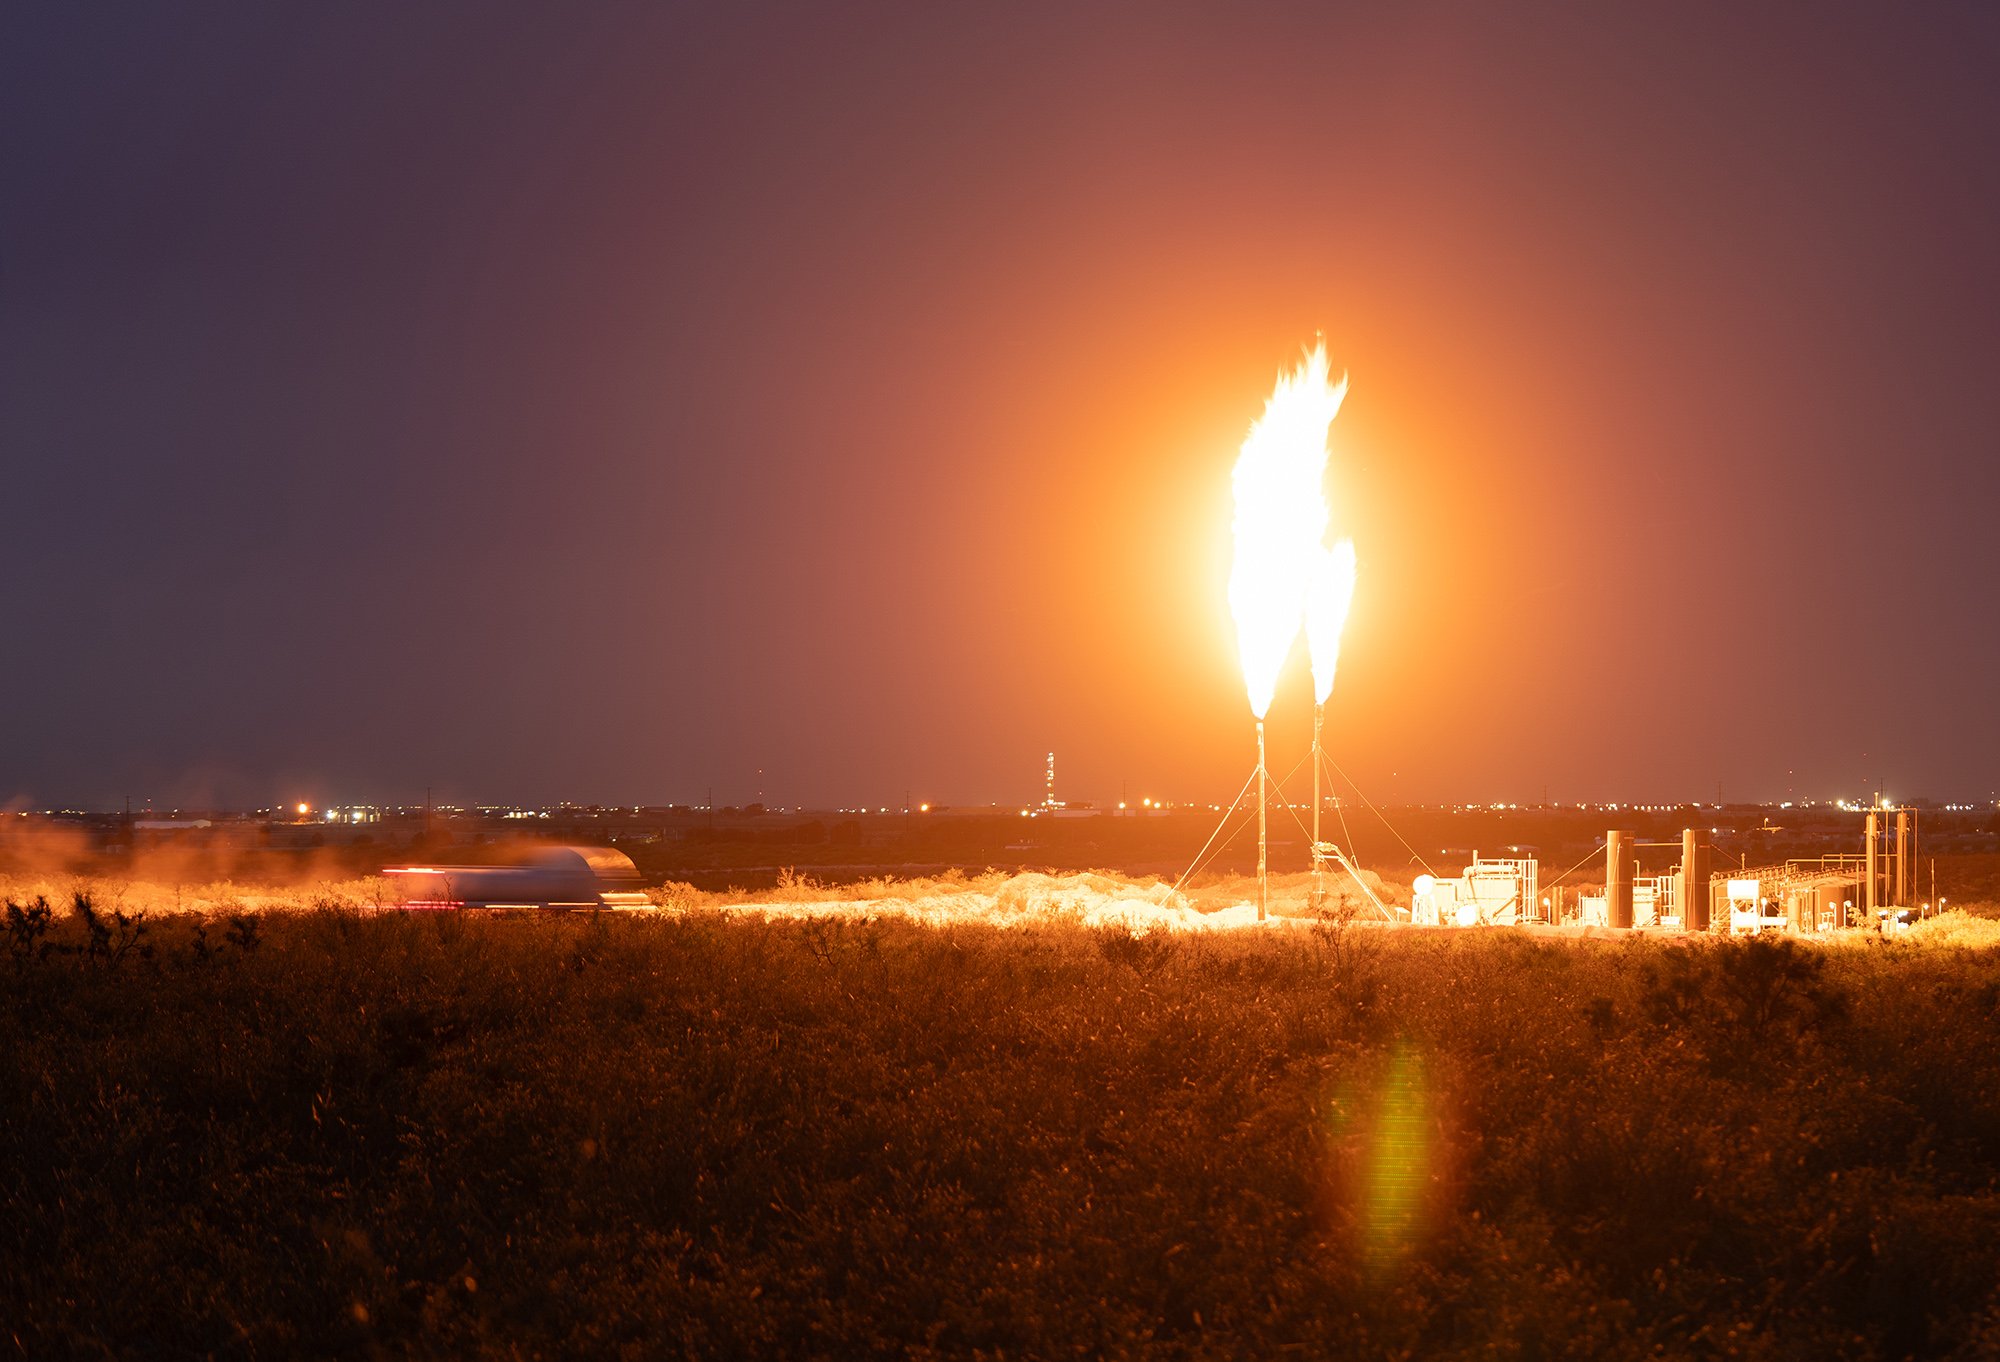 Flaring wells in Carlsbad, NM photographed for the Center for Biological Diversity